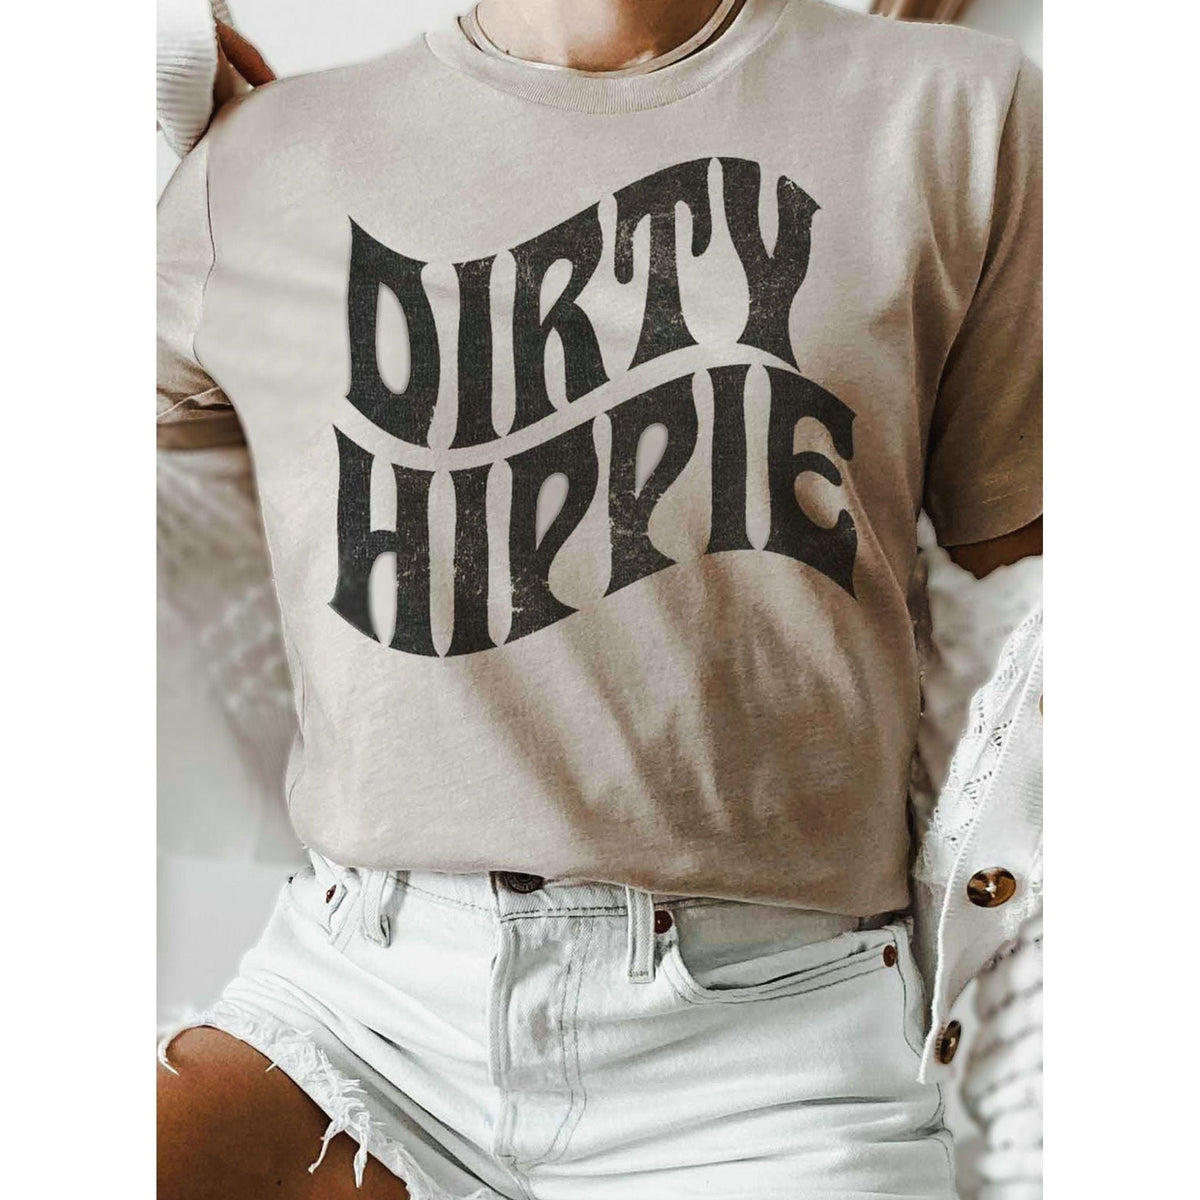 Dirty Hippie Graphic Tee | Dirty Hippie Shirt | Womens Boho T-Shirt Graphic T-shirt TheFringeCultureCollective